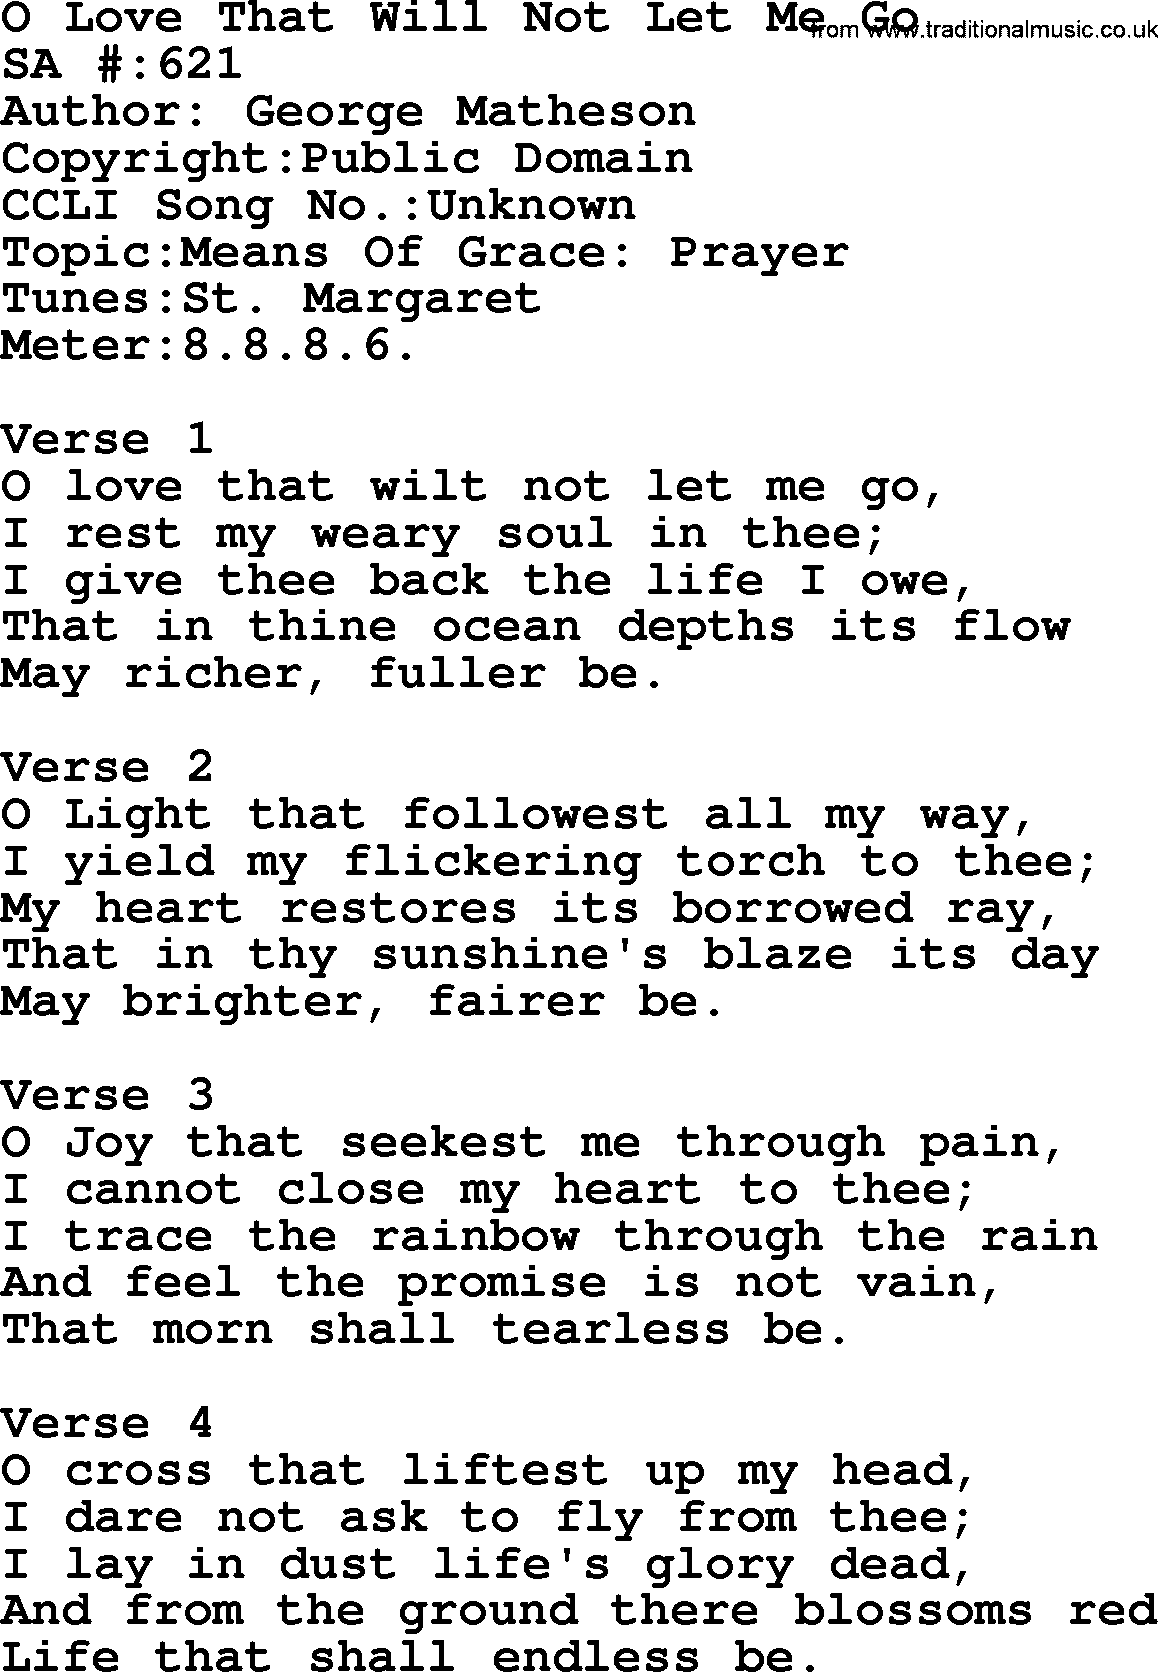 Salvation Army Hymnal, title: O Love That Will Not Let Me Go, with lyrics and PDF,